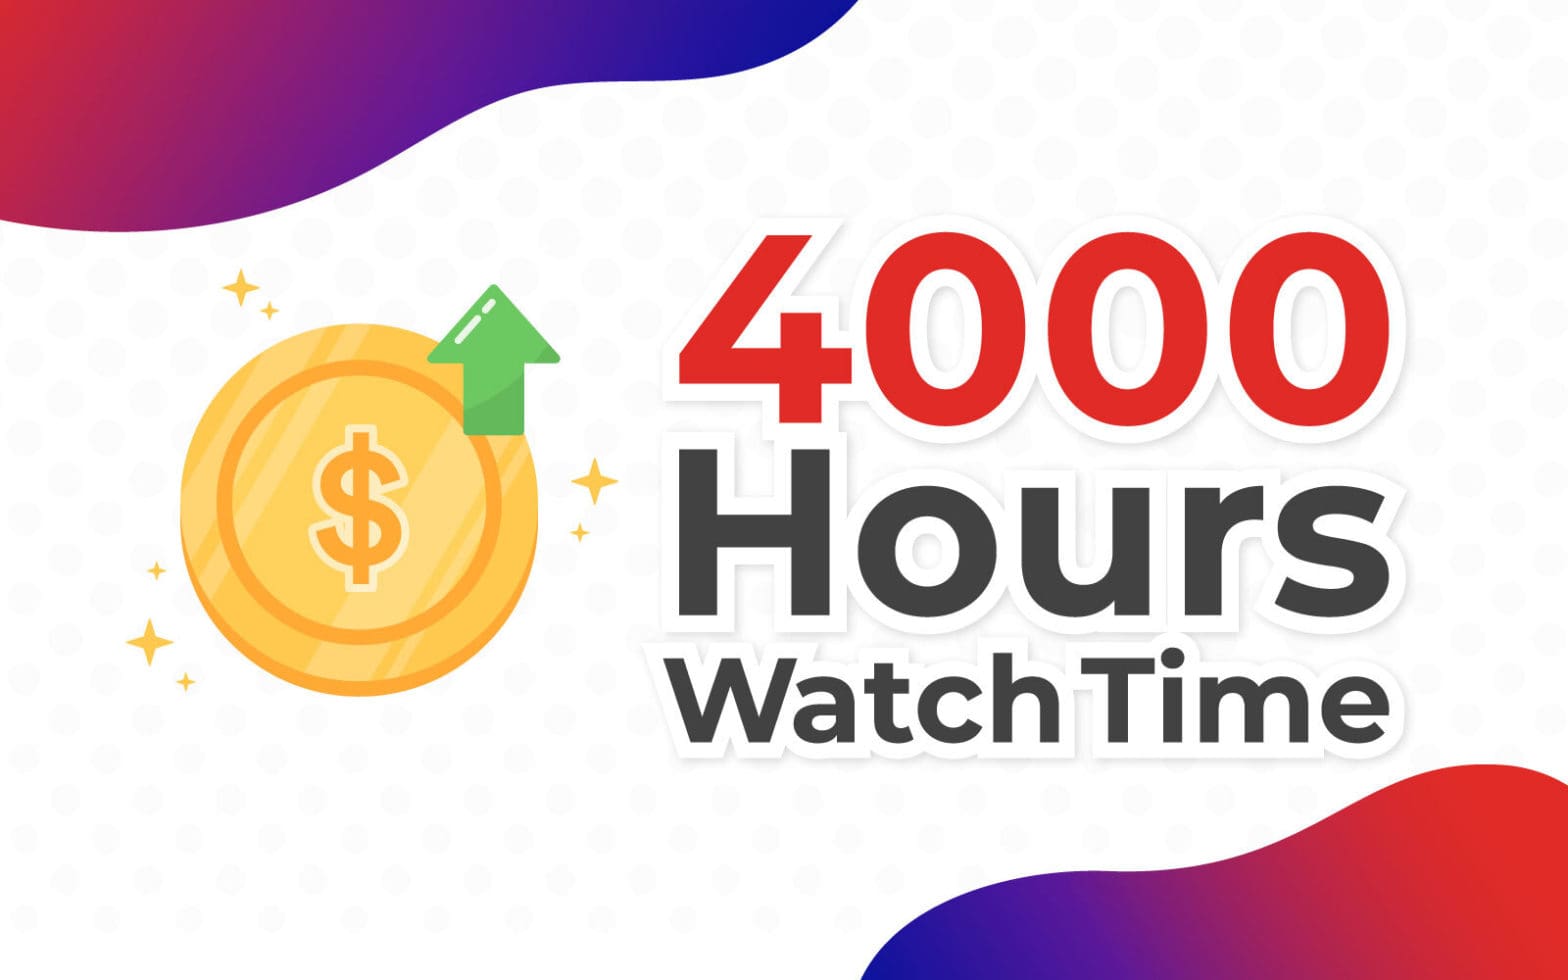 How to get 4,000 hours on YouTube?